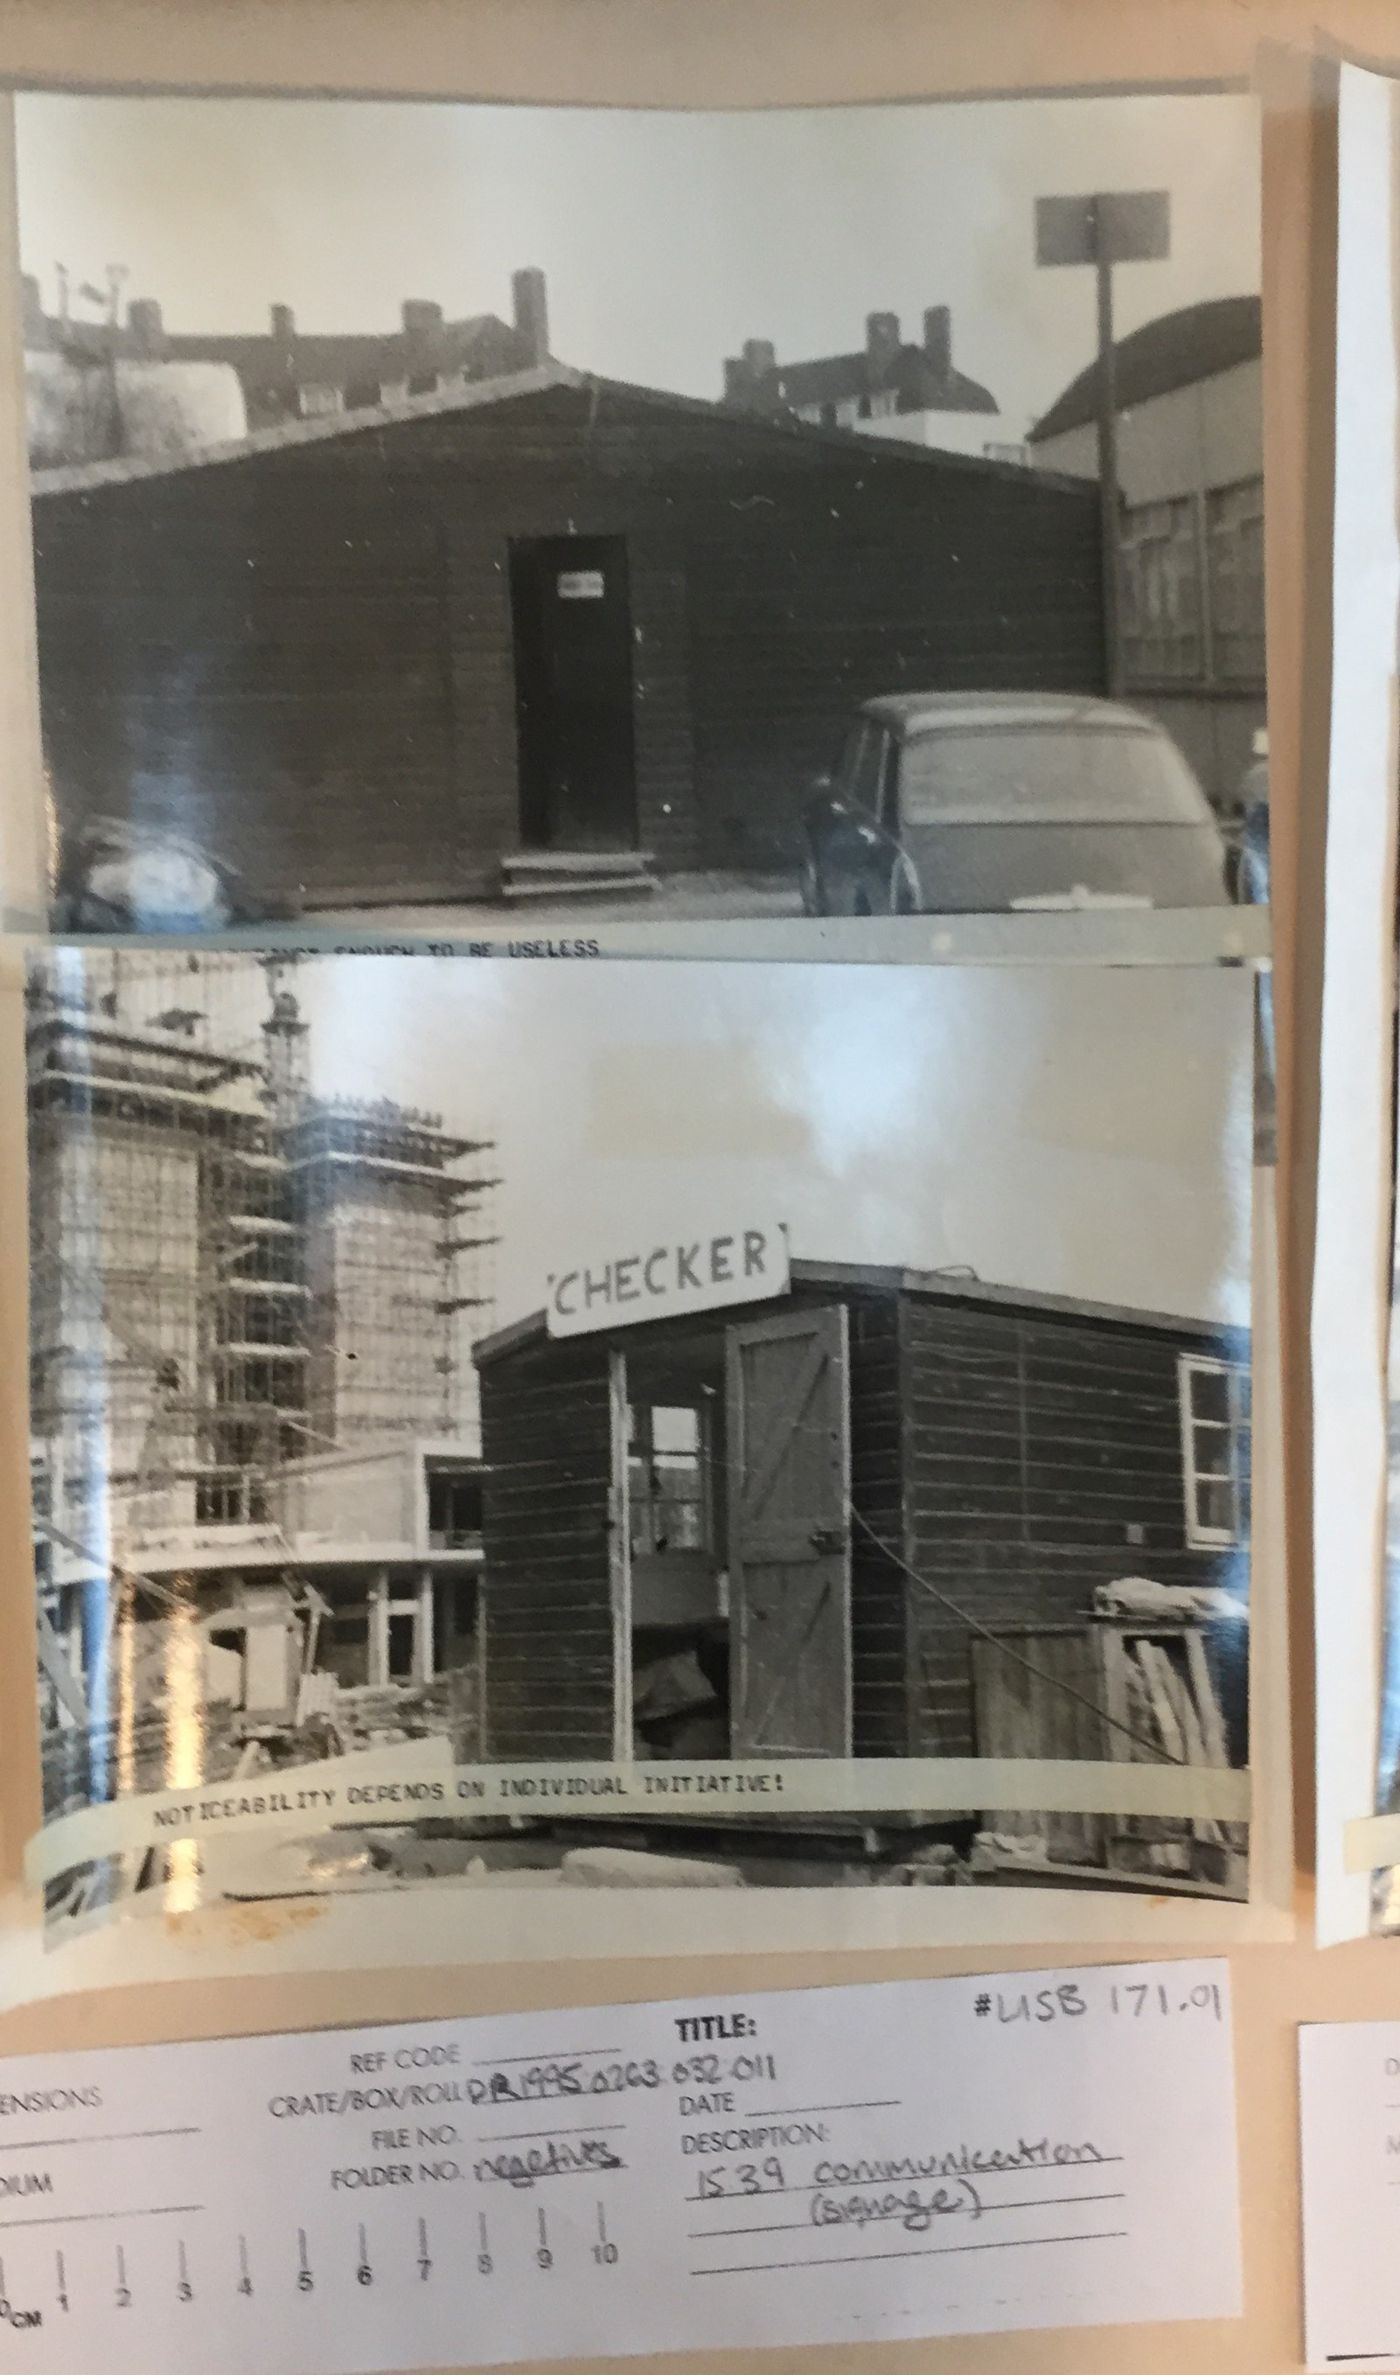 Views of construction site with comments about signage (from McAppy project records)